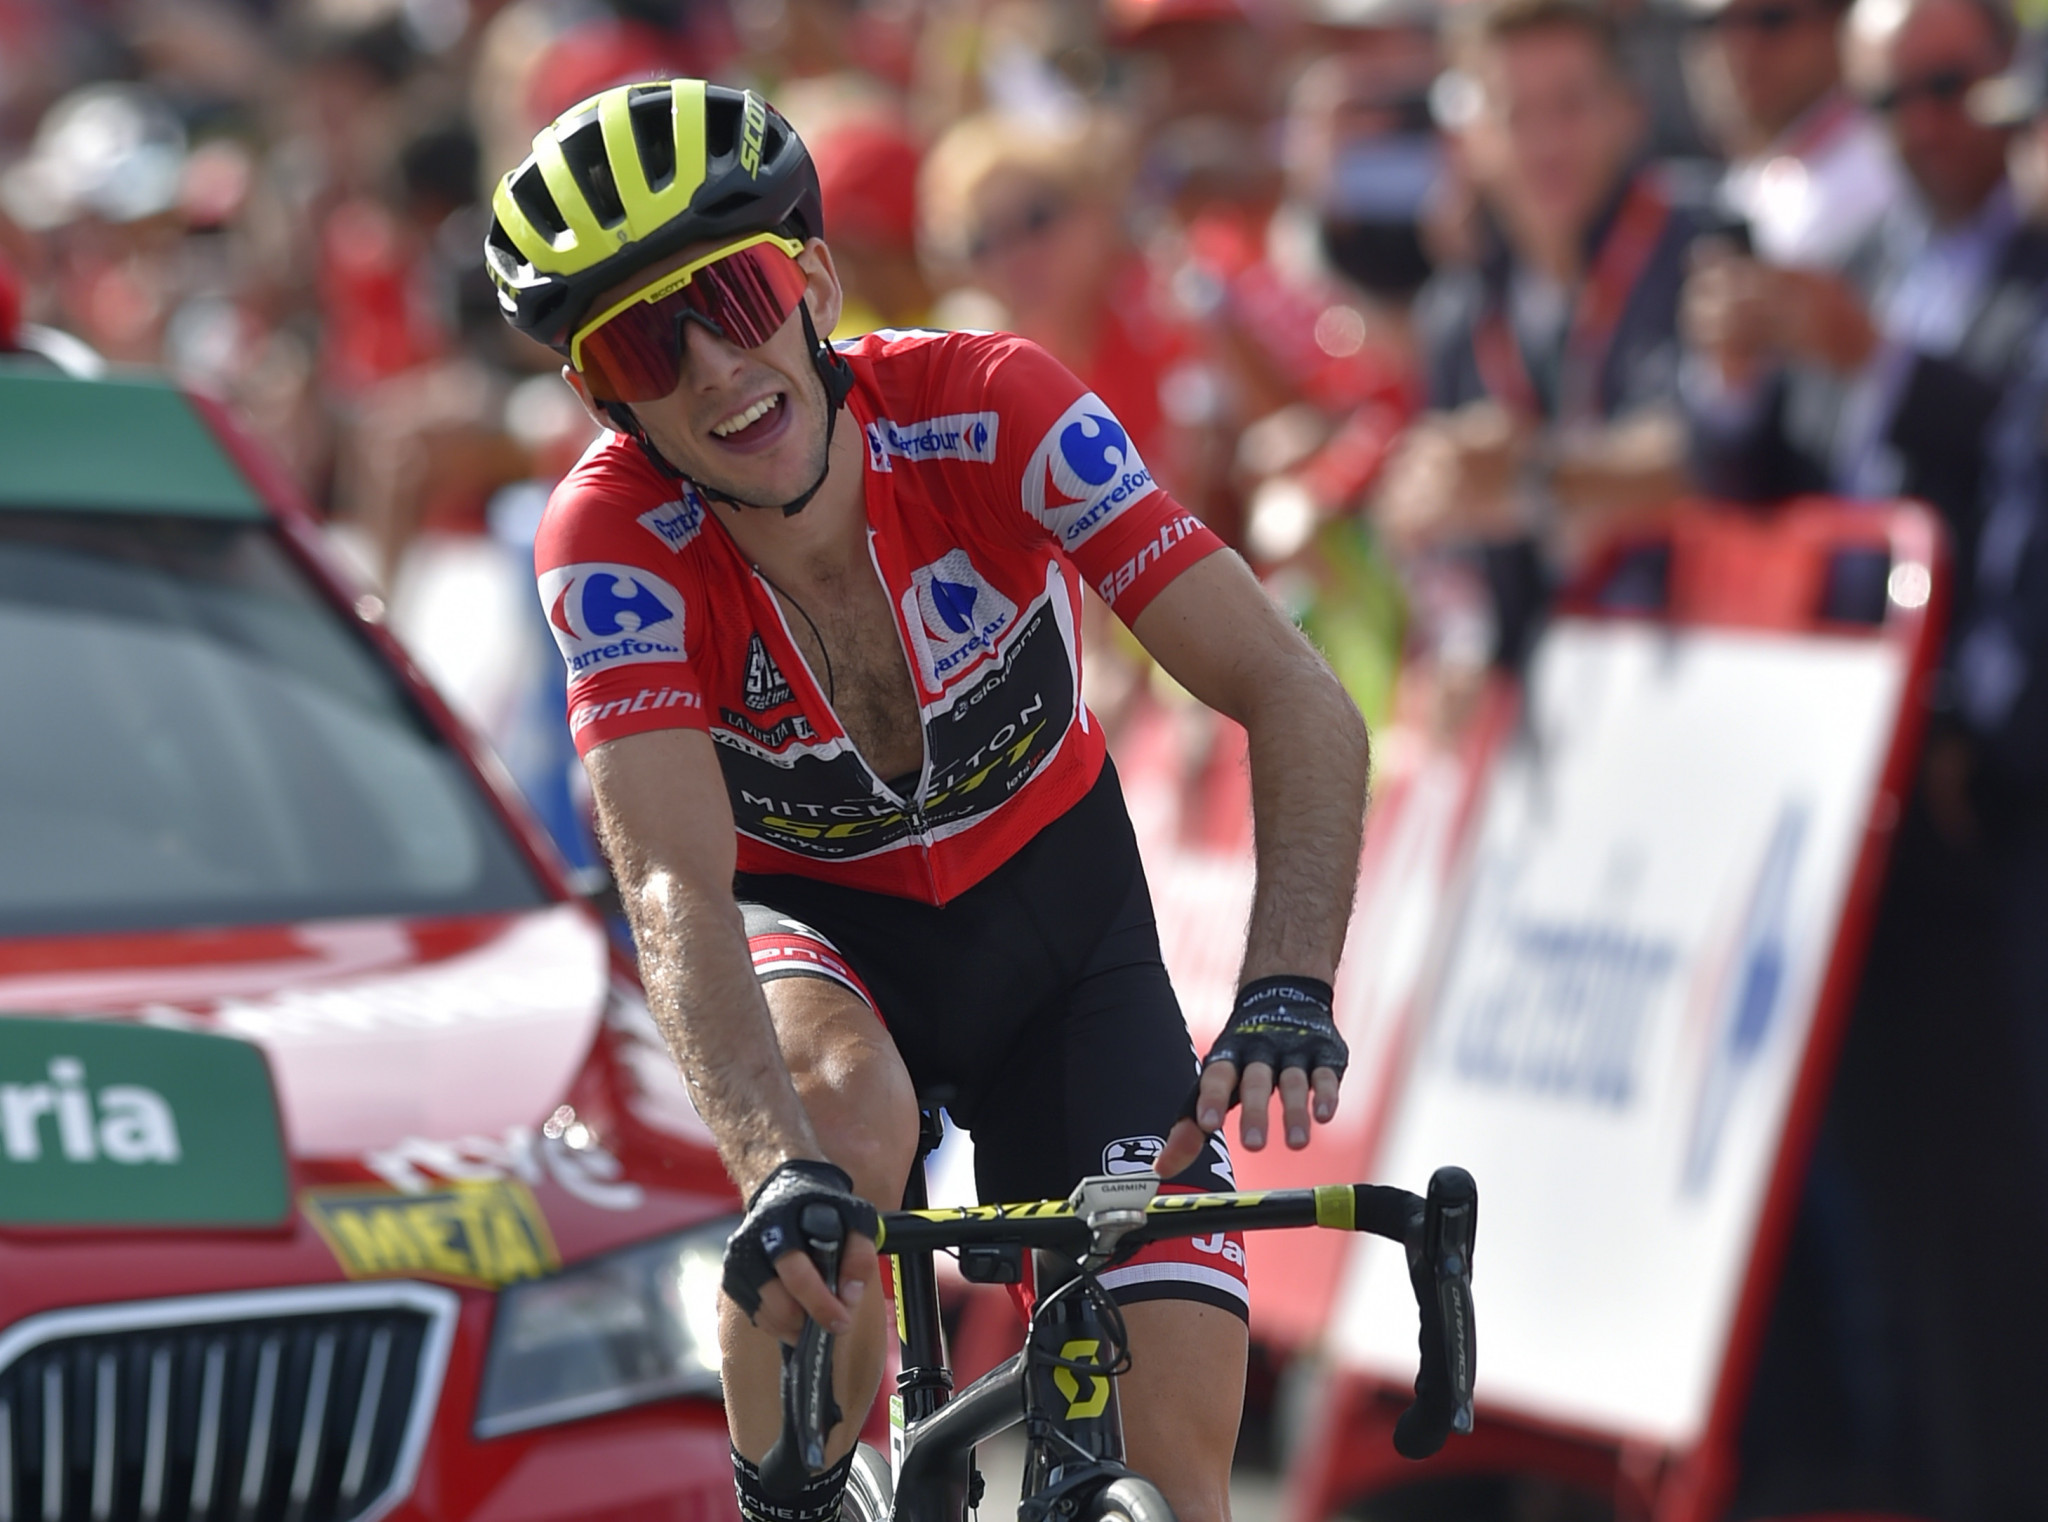  Yates on verge of Vuelta a España win after second place finish on stage 19